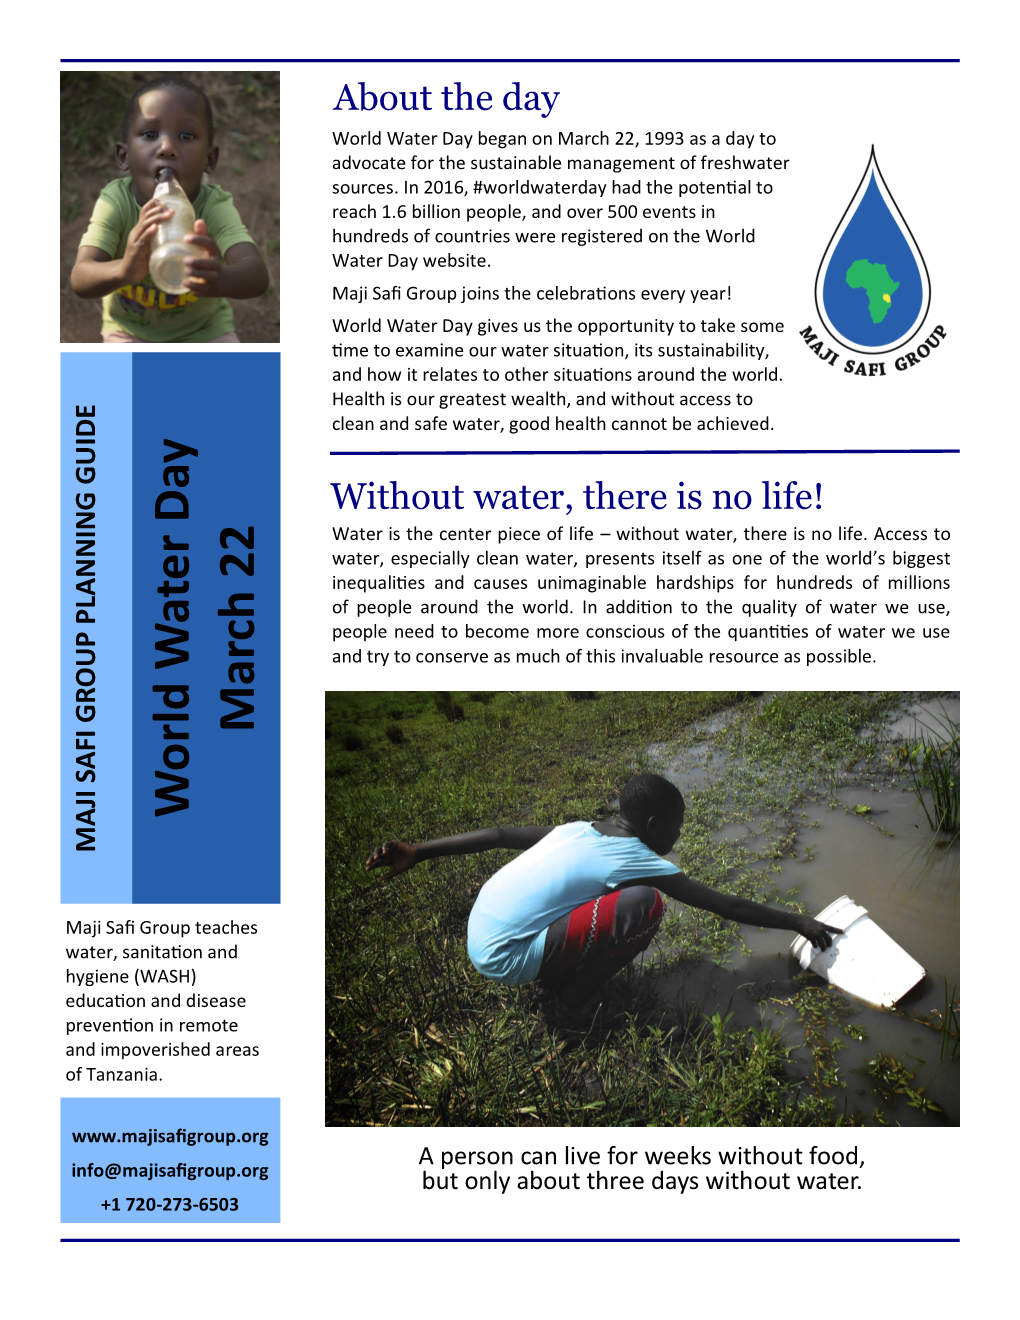 World Water Day Began on March 22, 1993 As a Day to Advocate for the Sustainable Management of Freshwater Sources